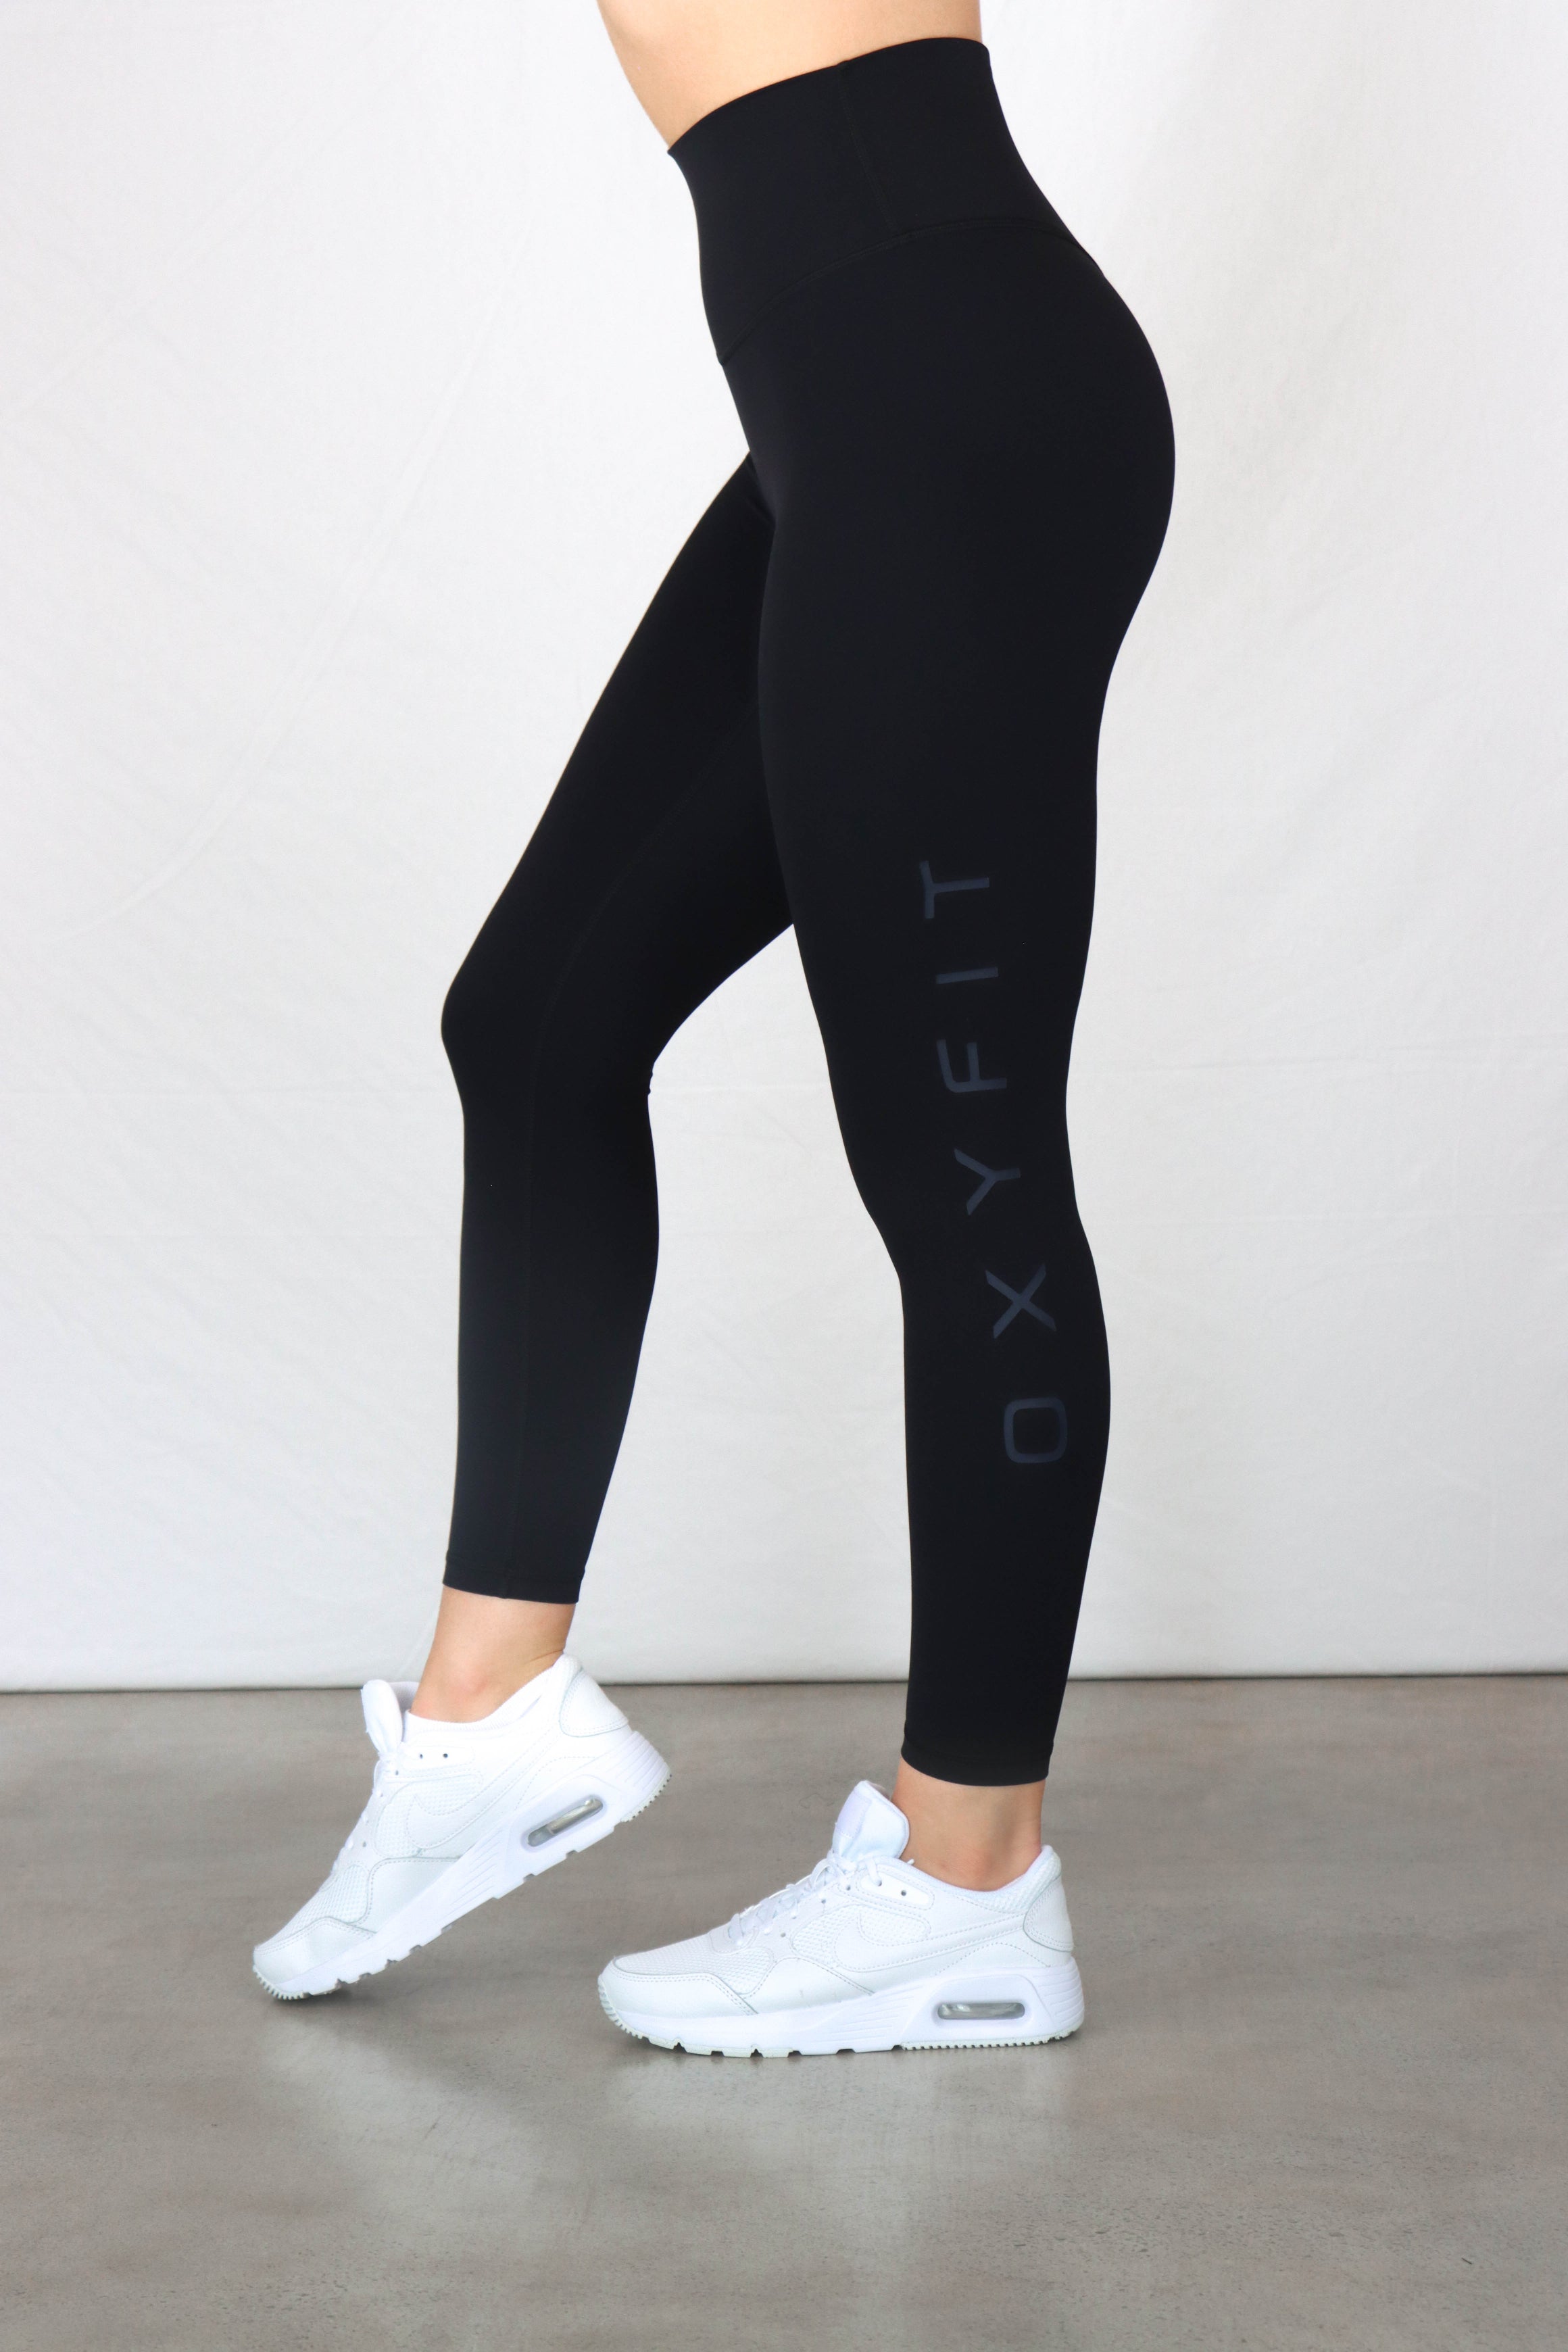 Pin by Fitnesshealth.co on Funky Fitness Apparel | Shiny leggings, Fashion  tights, Outfits with leggings